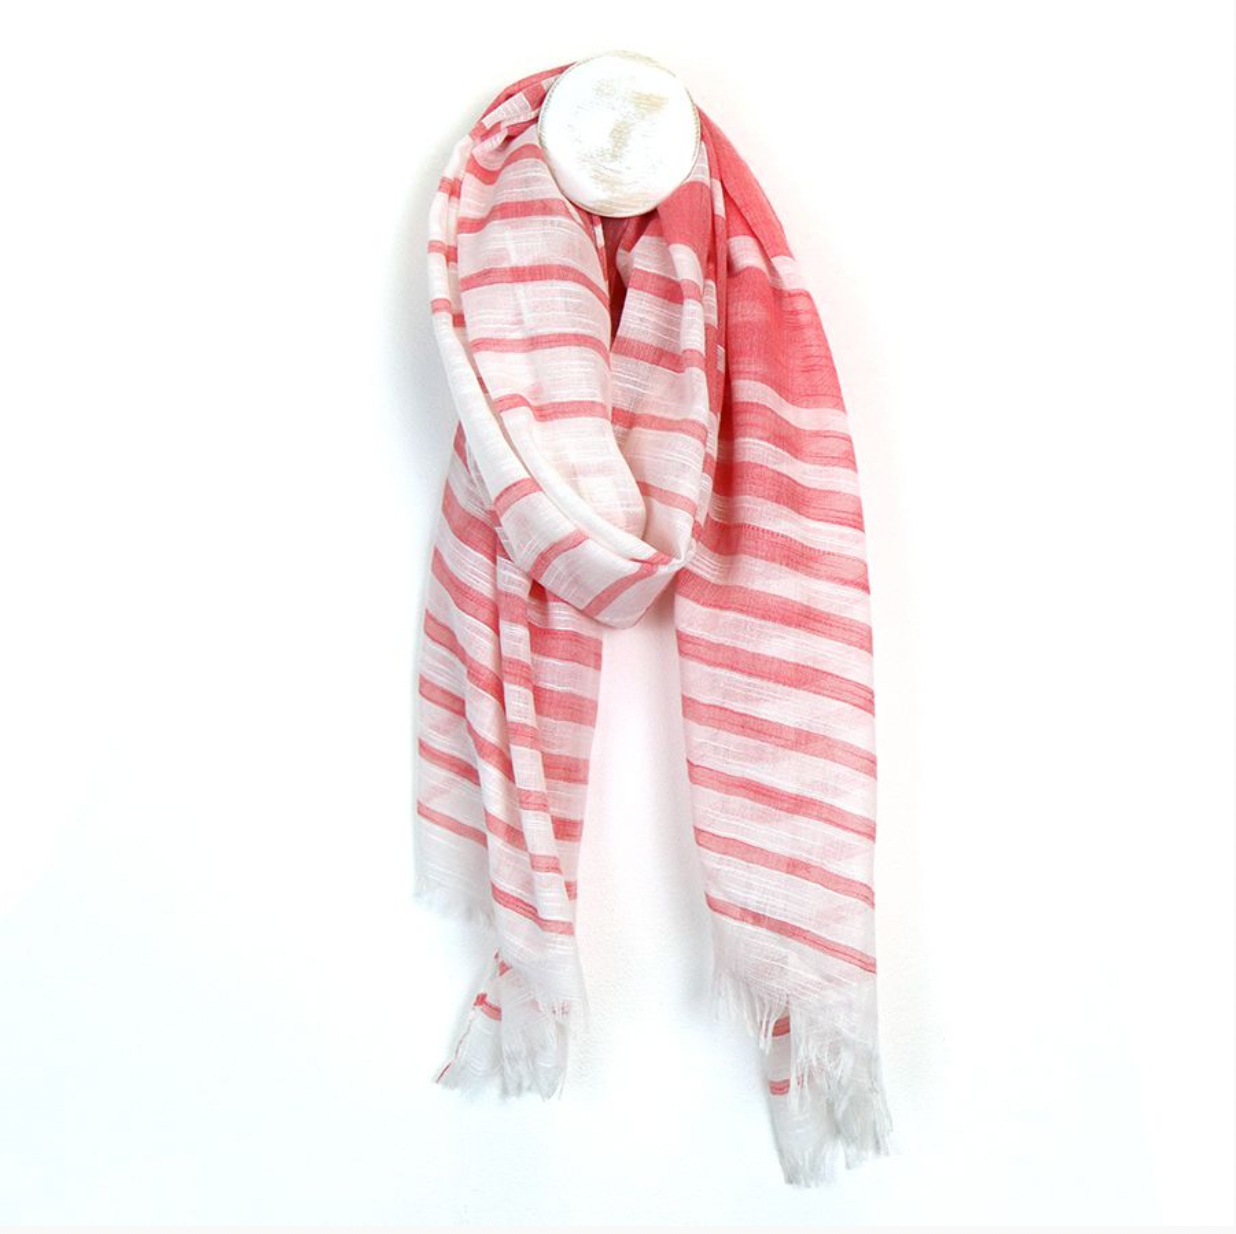 Coral & White Striped Summer Scarf